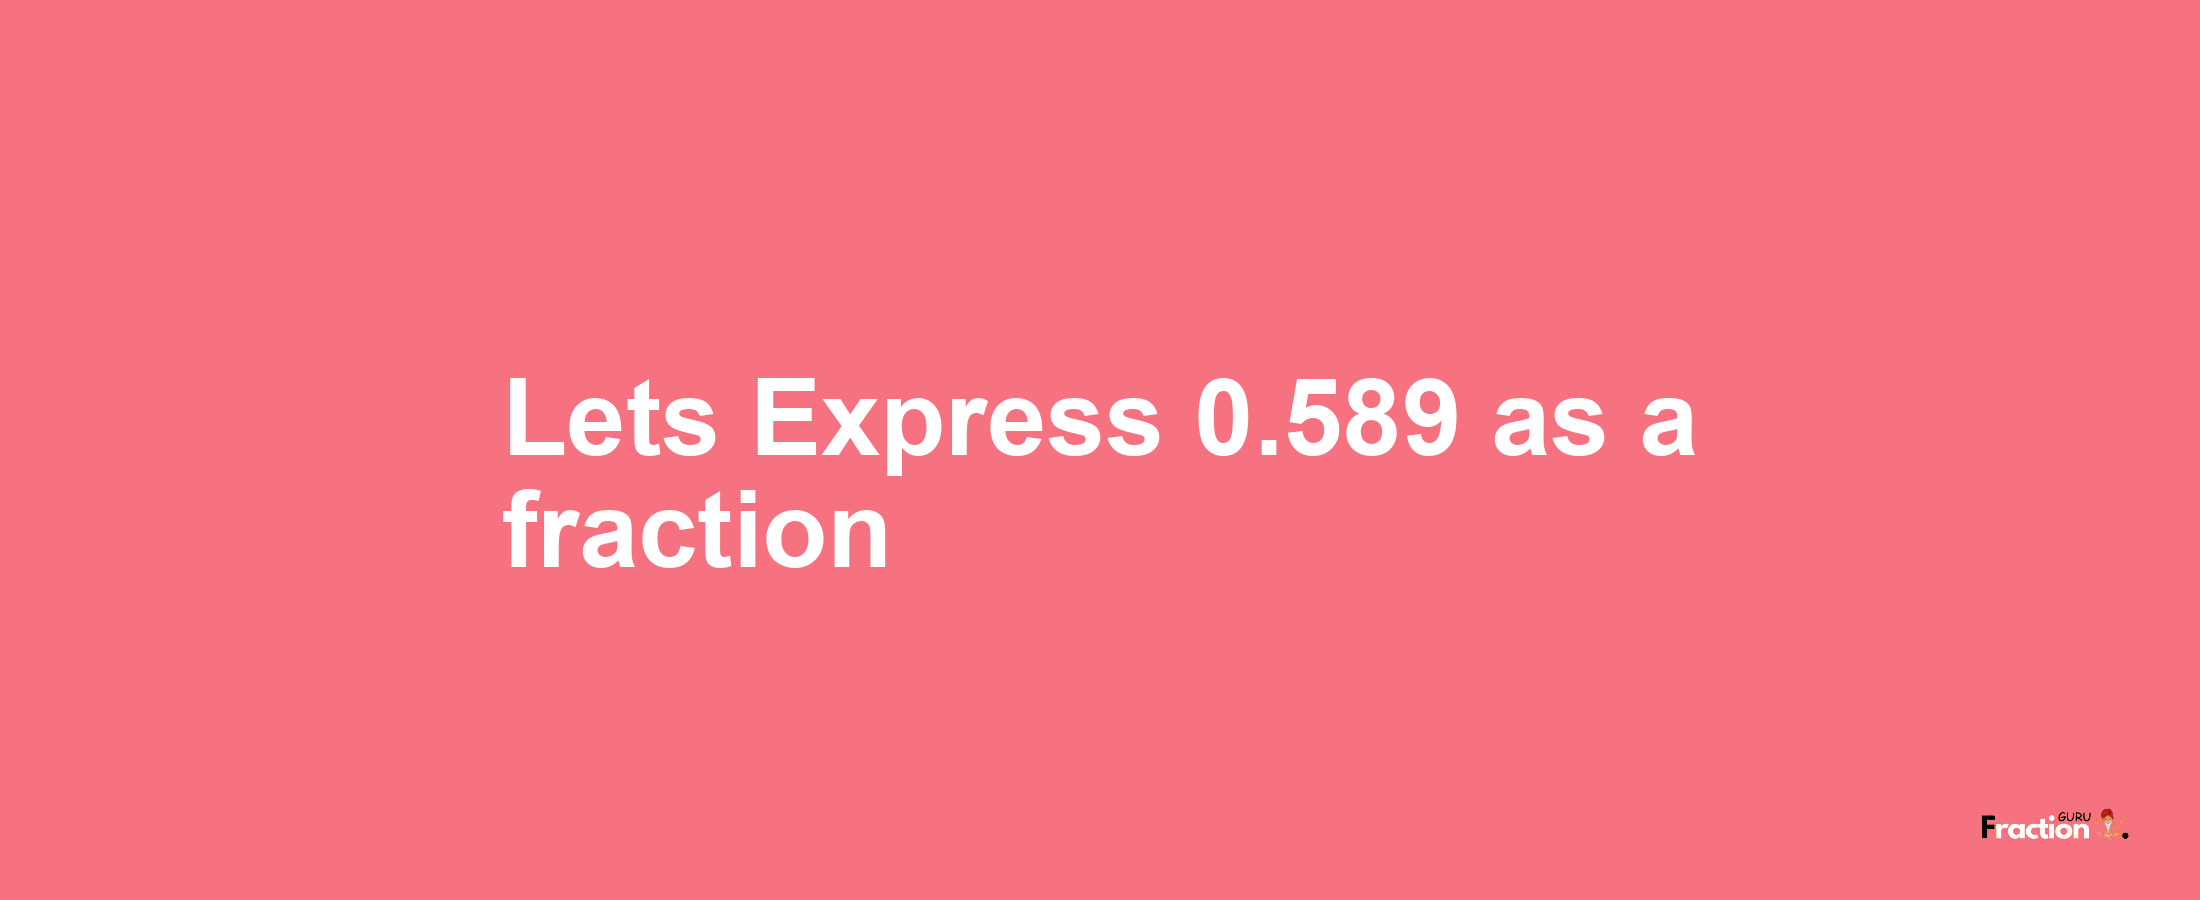 Lets Express 0.589 as afraction